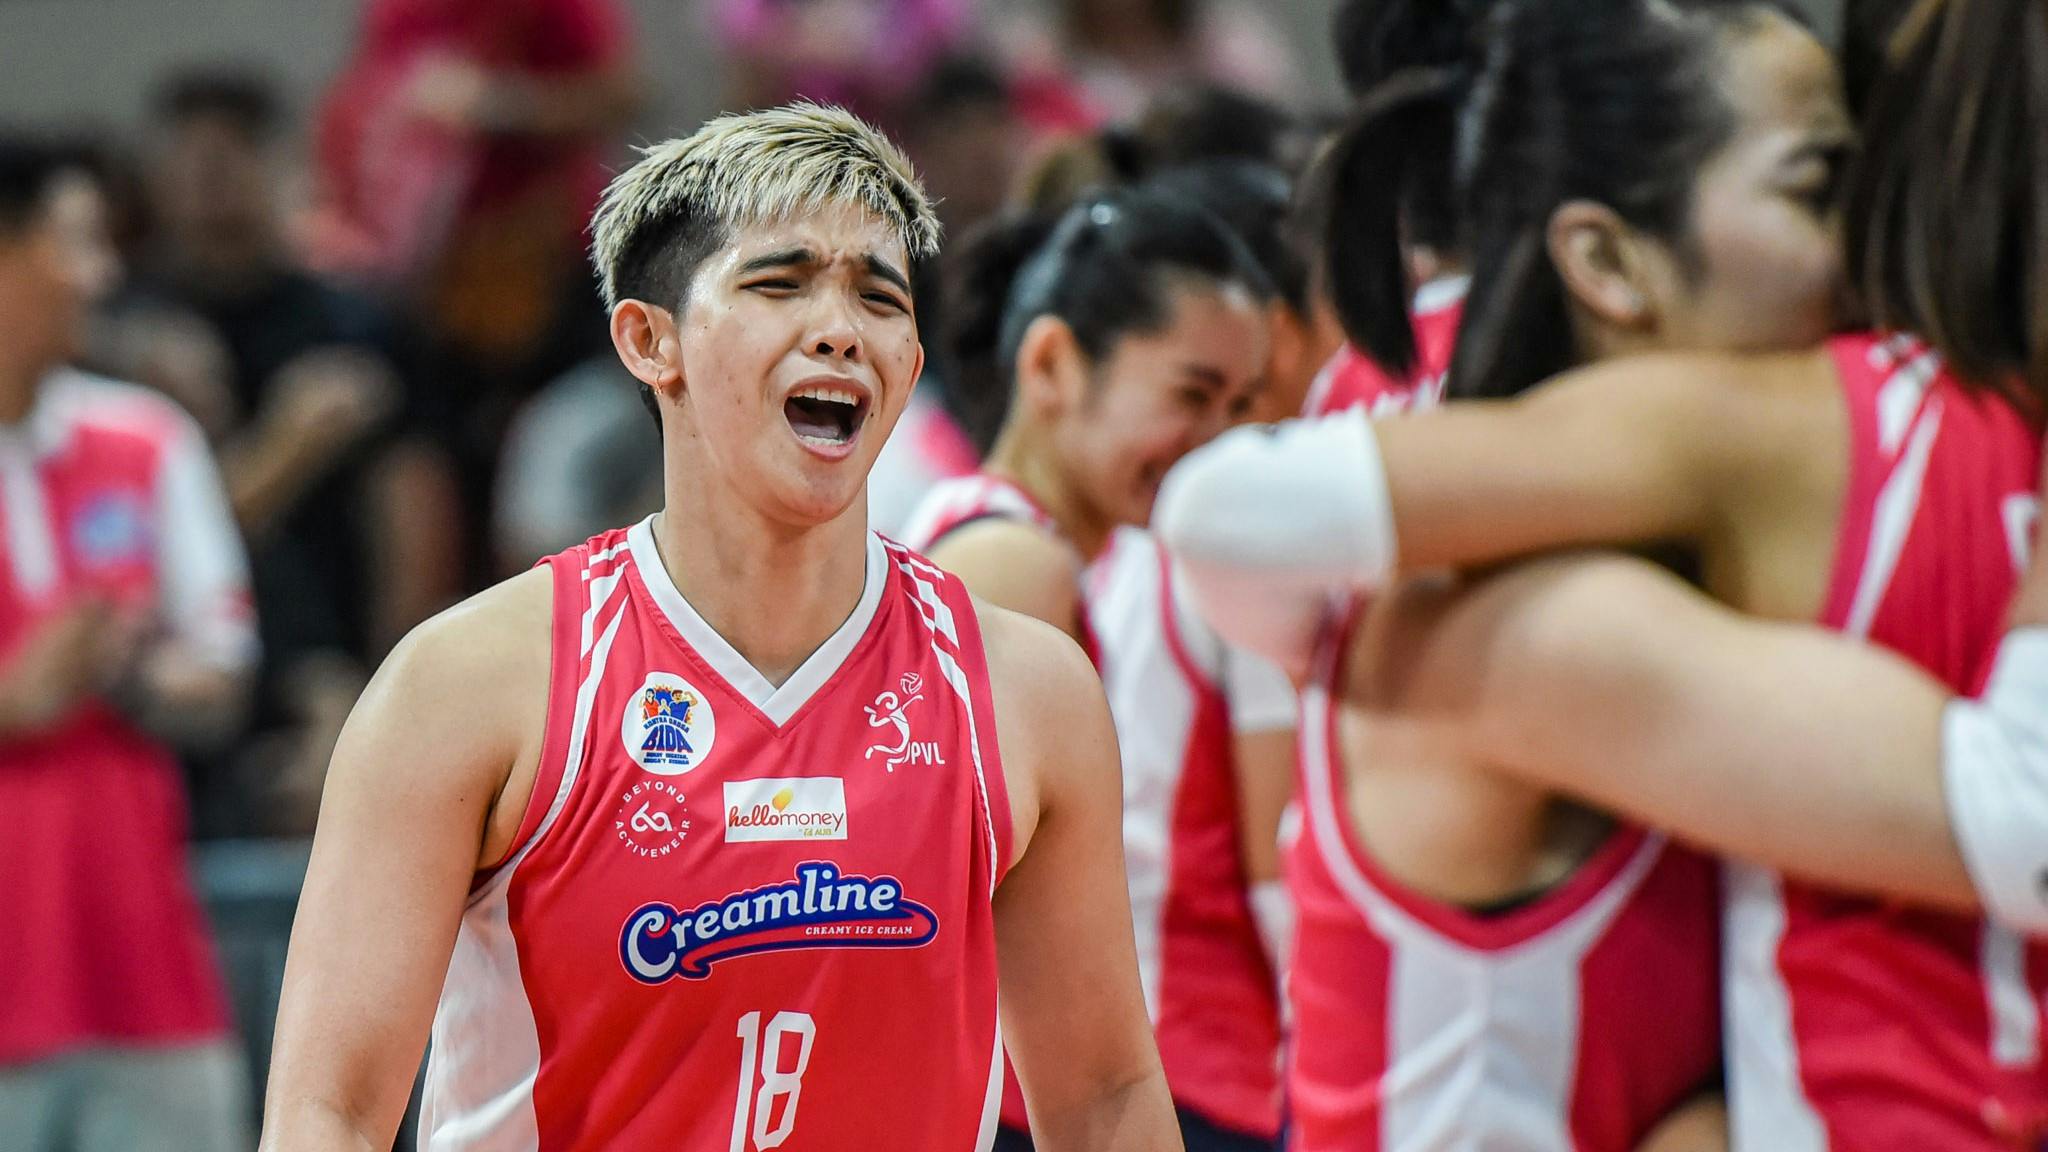 PVL: Tots Carlos says record-setting performance a byproduct of Creamline